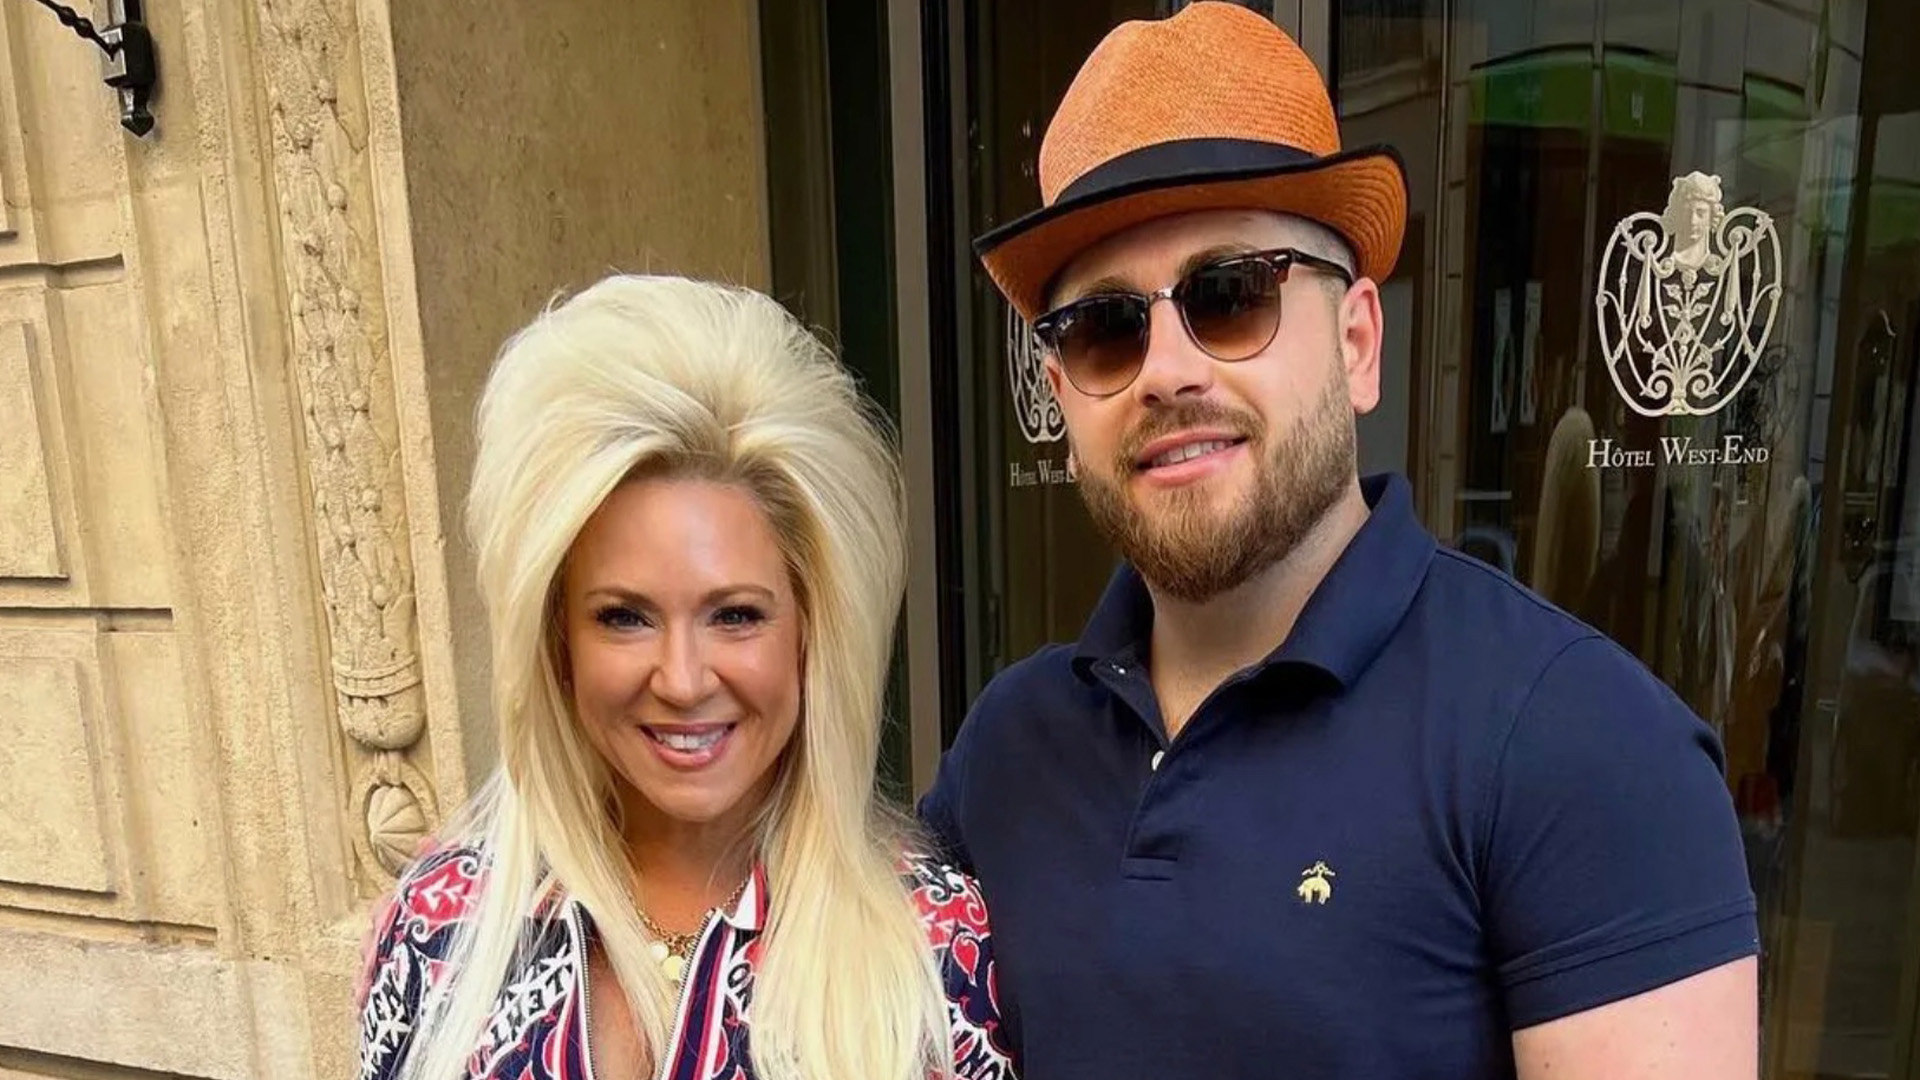 Long Island Medium fans believe Theresa Caputo’s boyfriend Larry is engaged with Leah, as they see a rare photo that reveals a ‘clue.